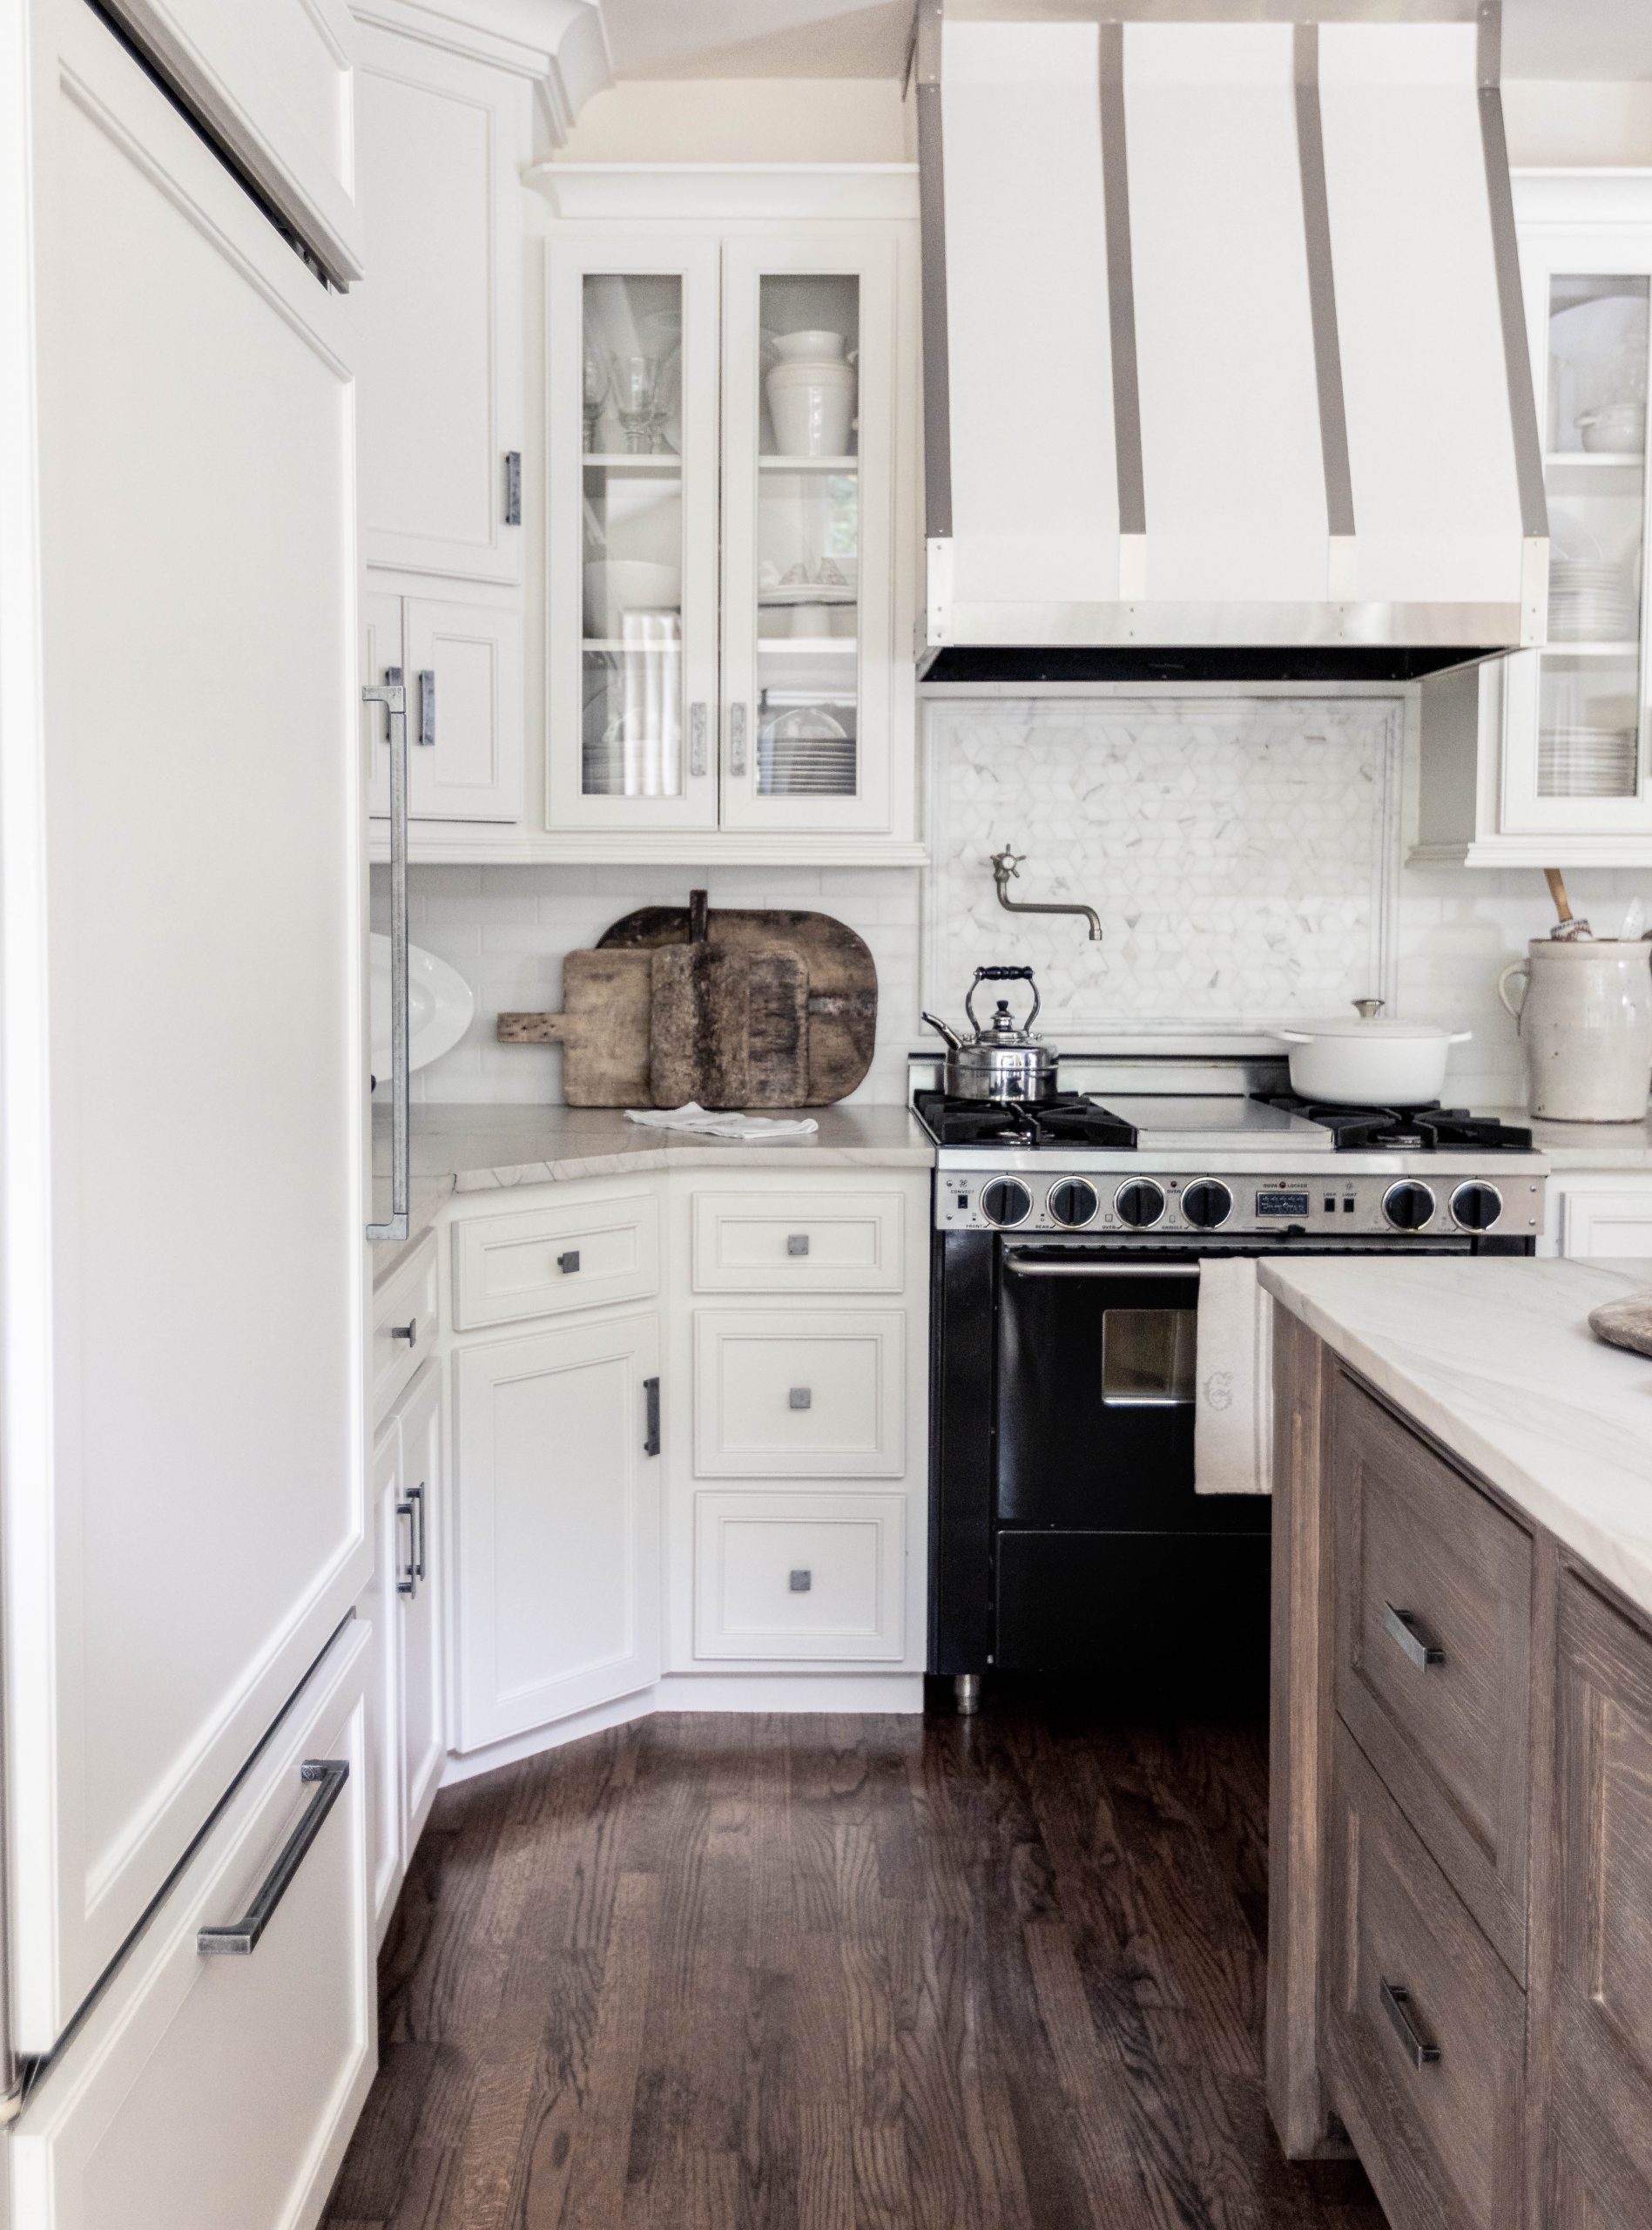 Traditional Kitchen Design - Blending Interior Styles in a Remodel